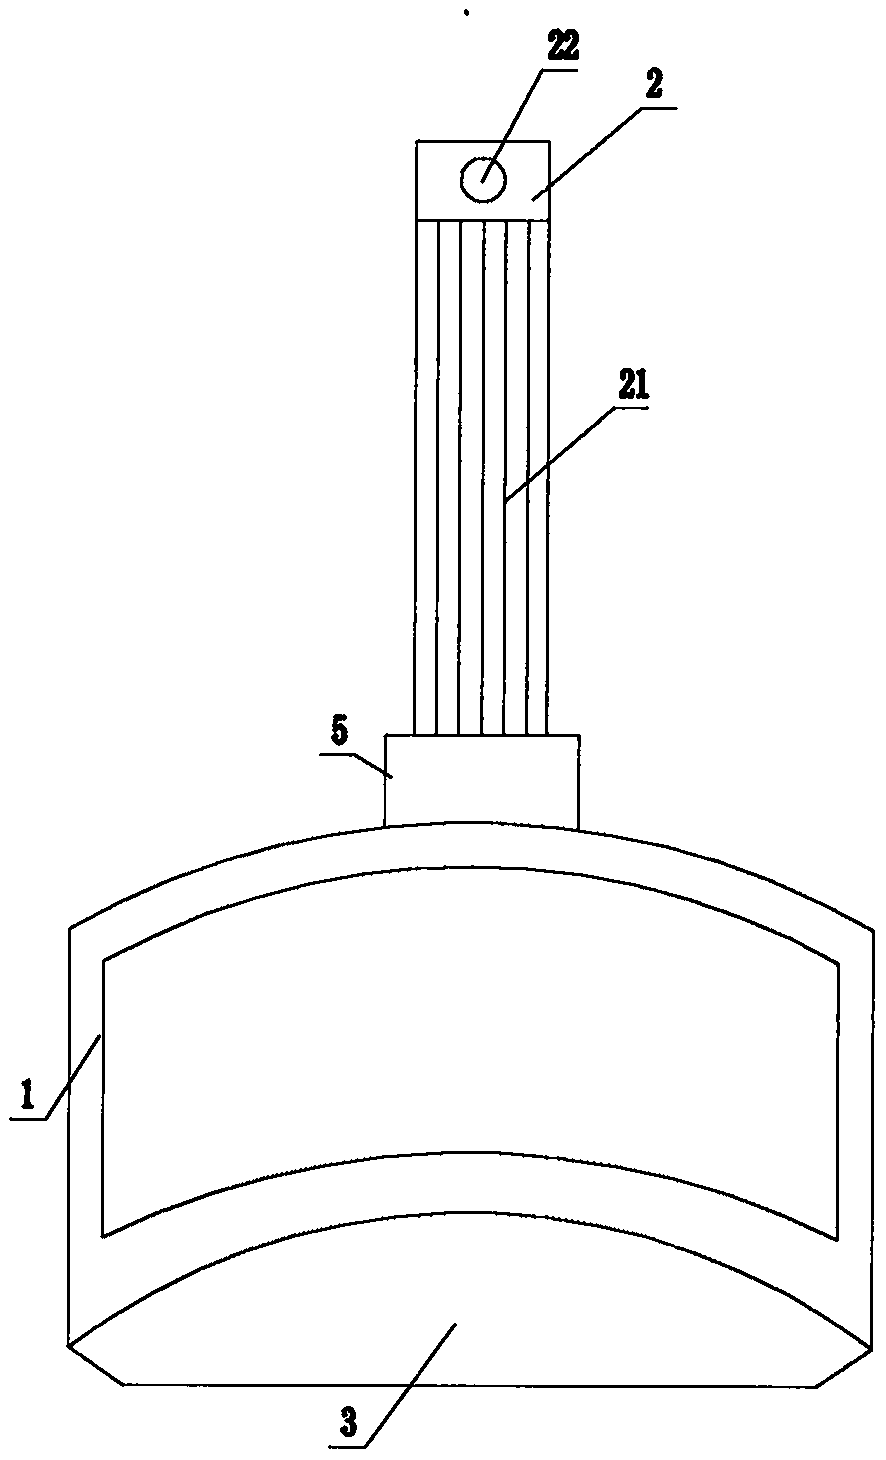 Coupling agent cleaning device